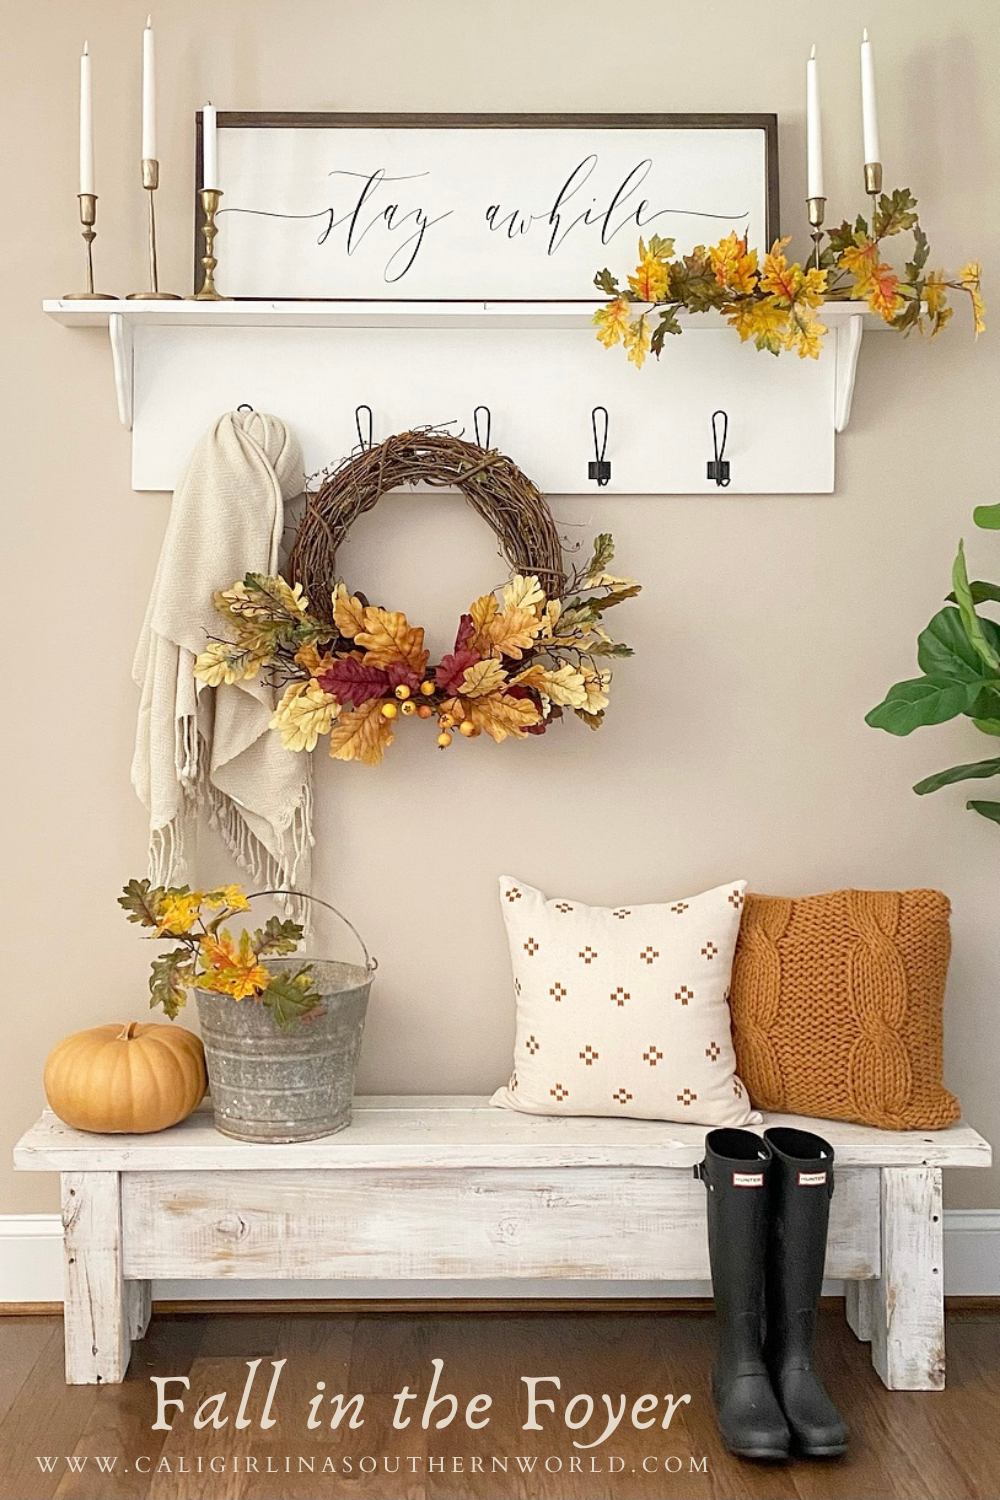 Pinterest Pin for Decorating the Foyer in Fall.